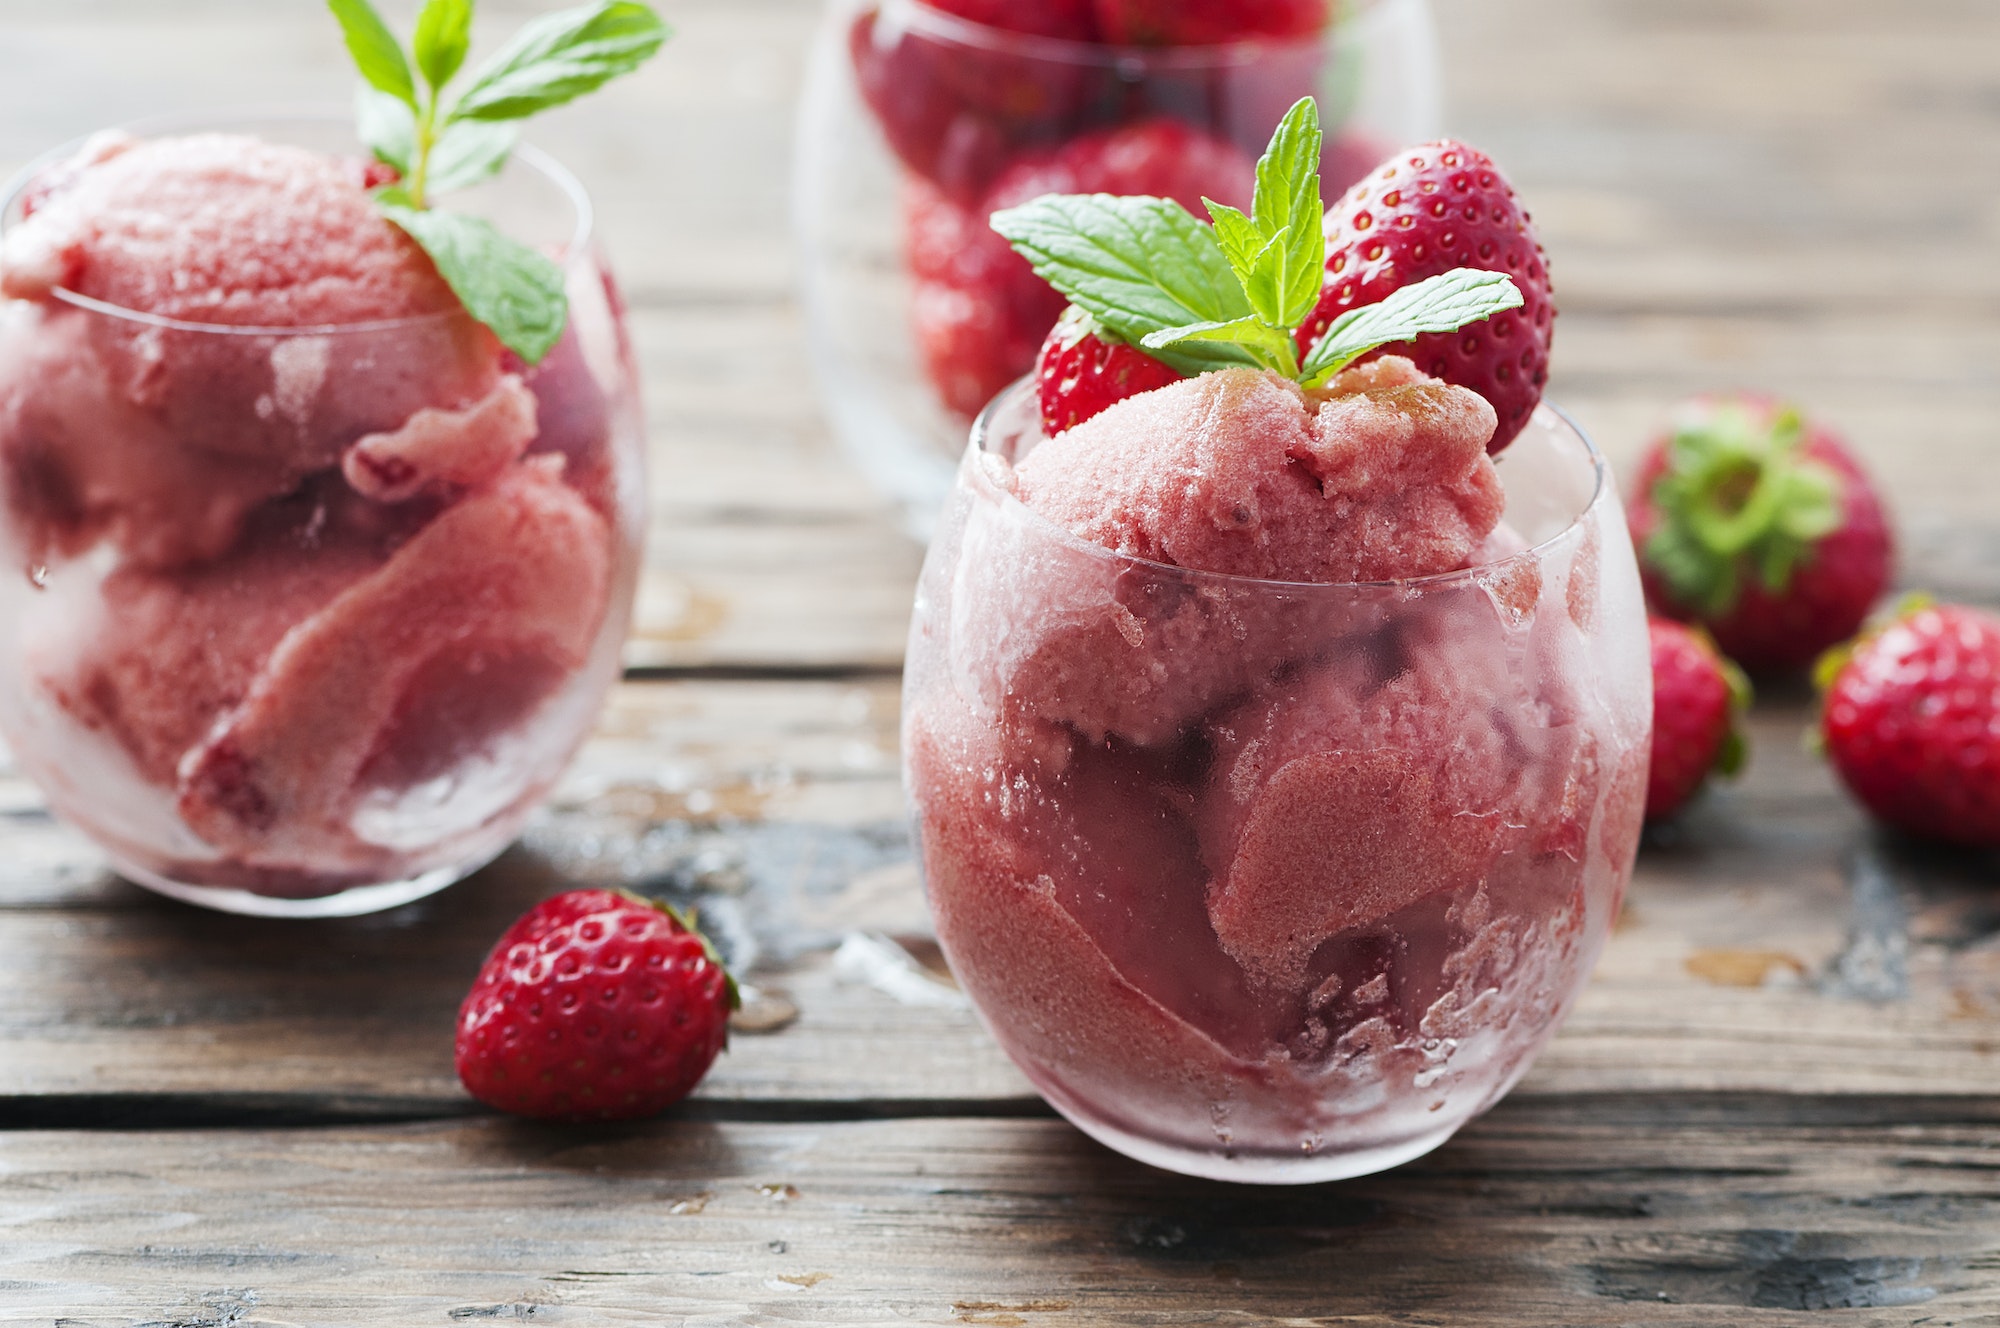 Sorbet with strawberry and mint